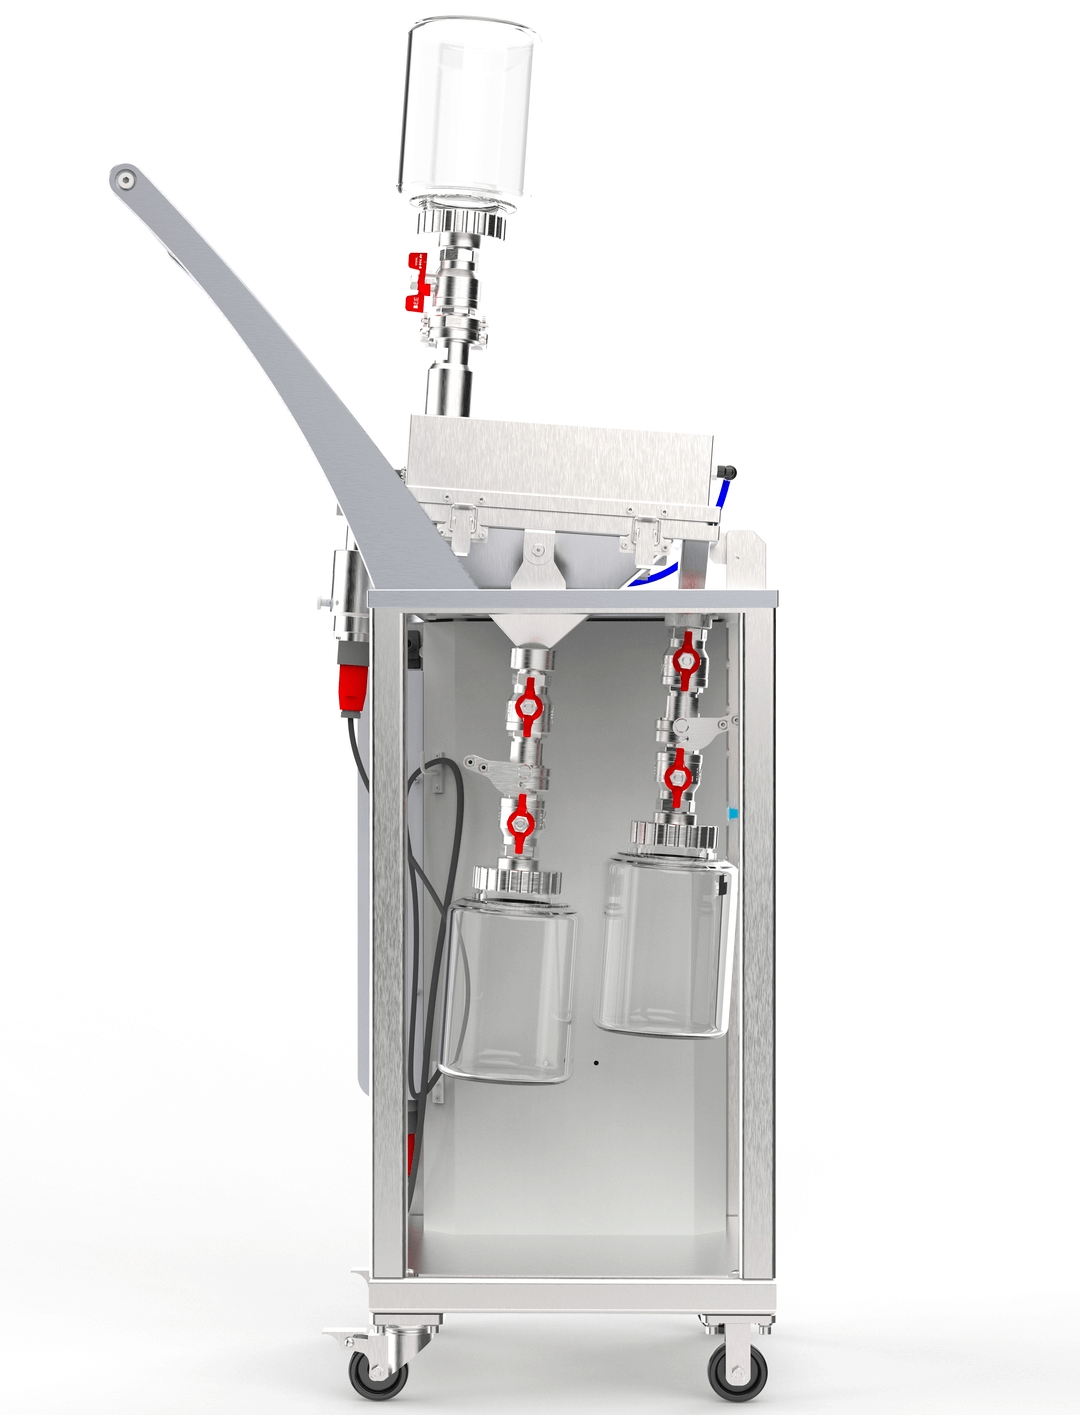 Image shows 2SIEVE system from 2oneLab for sieving used metal powder